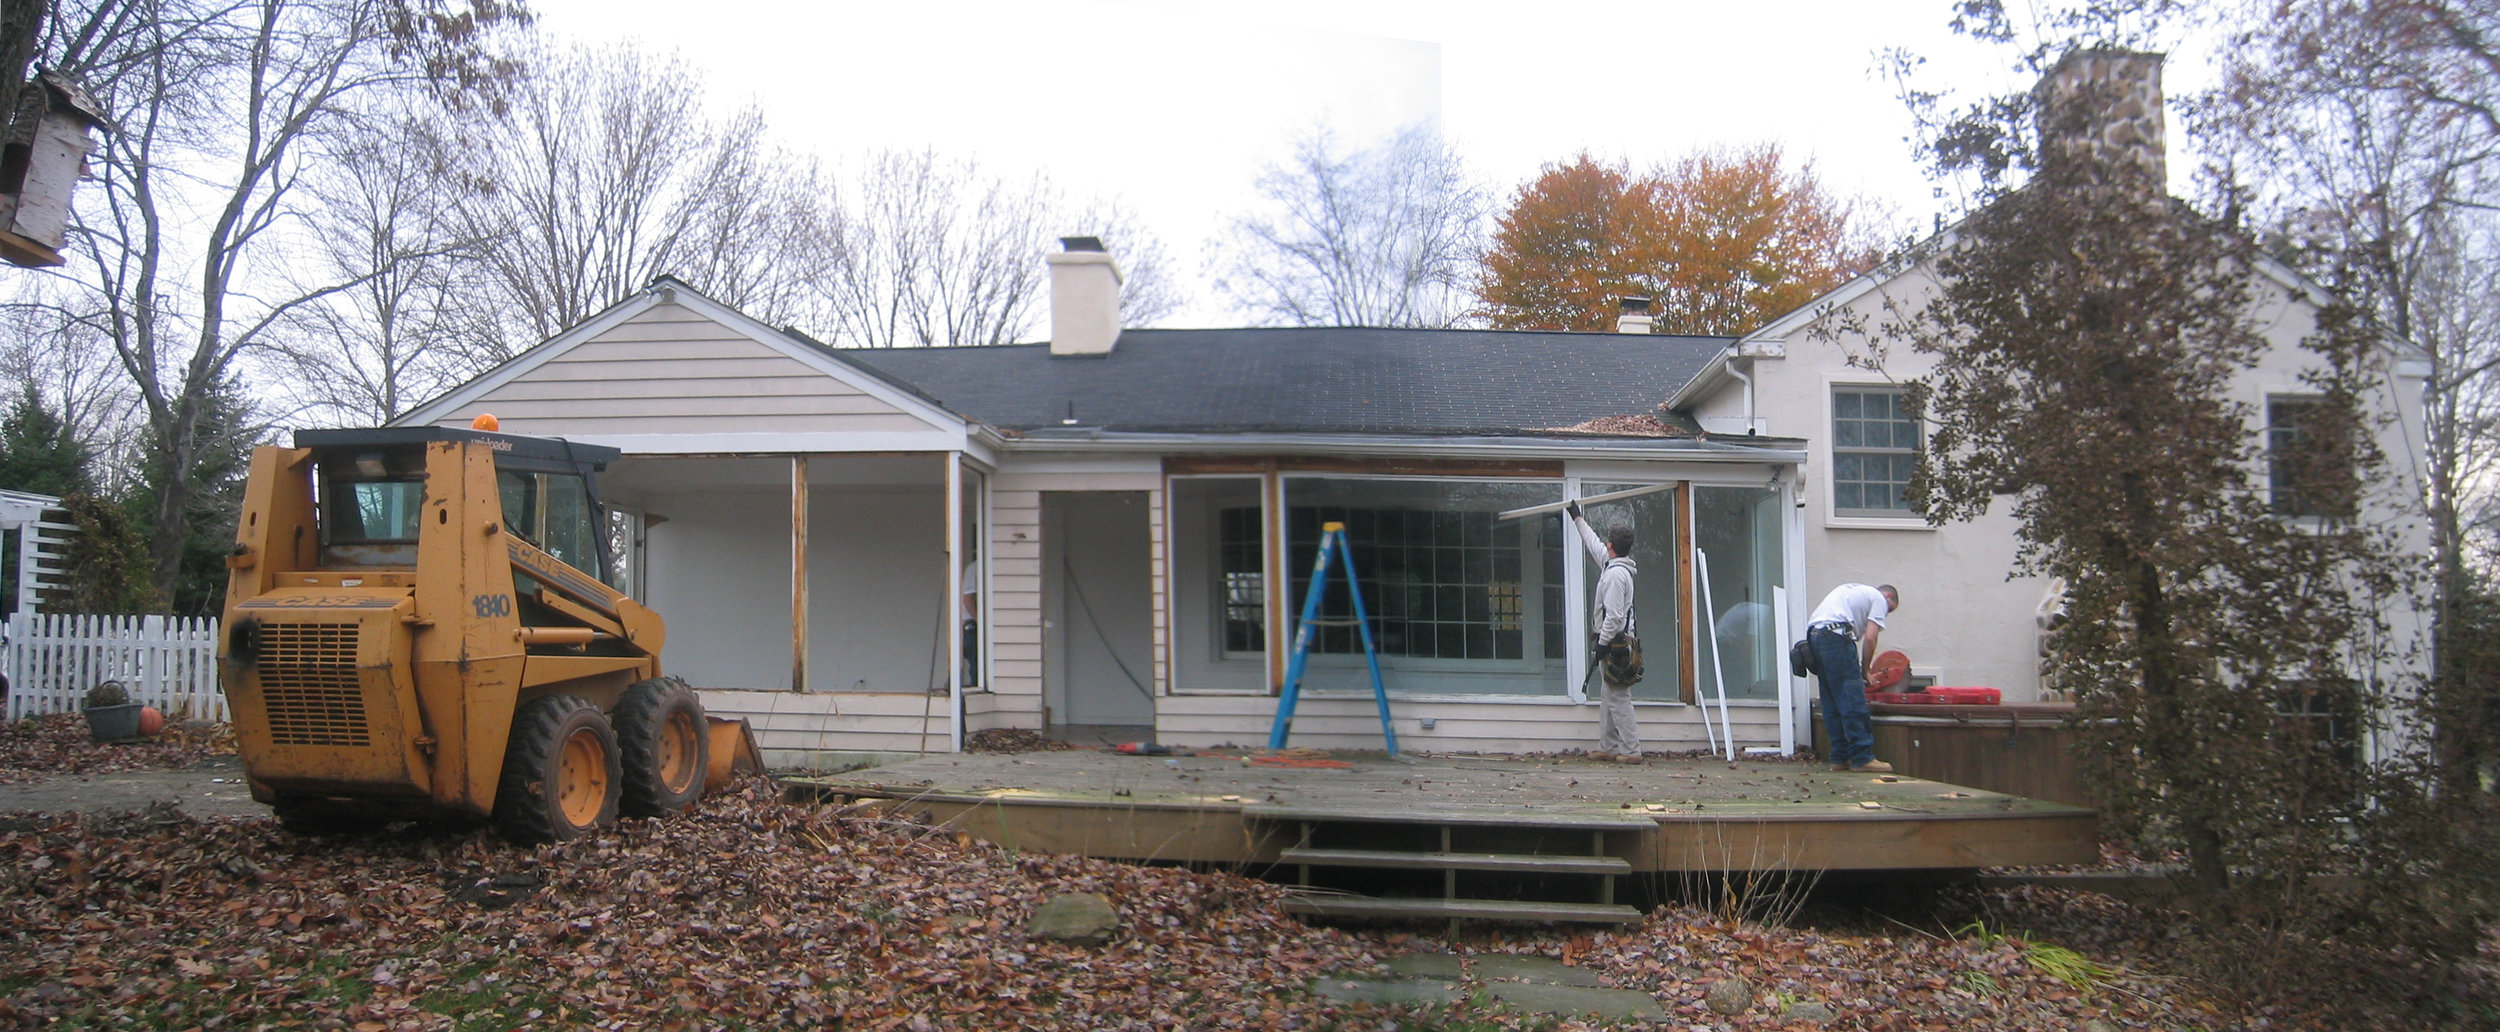  This job was brought to us by a fellow contractor who wanted us to build the outer shell of this addition. Once it was up and weather-tight,&nbsp;he would complete the interior renovations.&nbsp;"Before" picture of original sunroom and deck during t